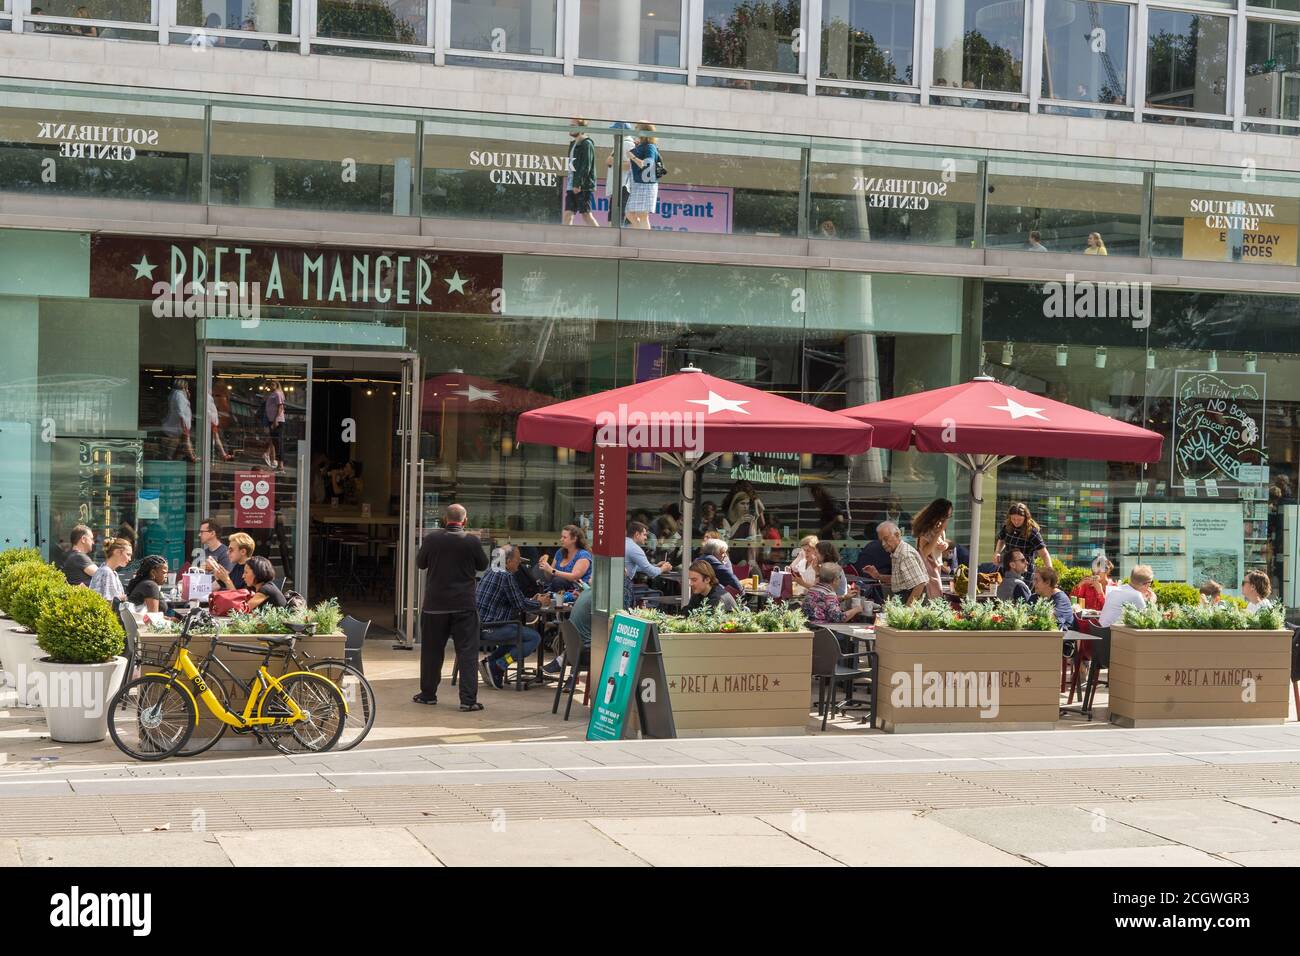 Pret a Manger on the Southbank of the River Thames on a sunny say with lots of people. London Stock Photo